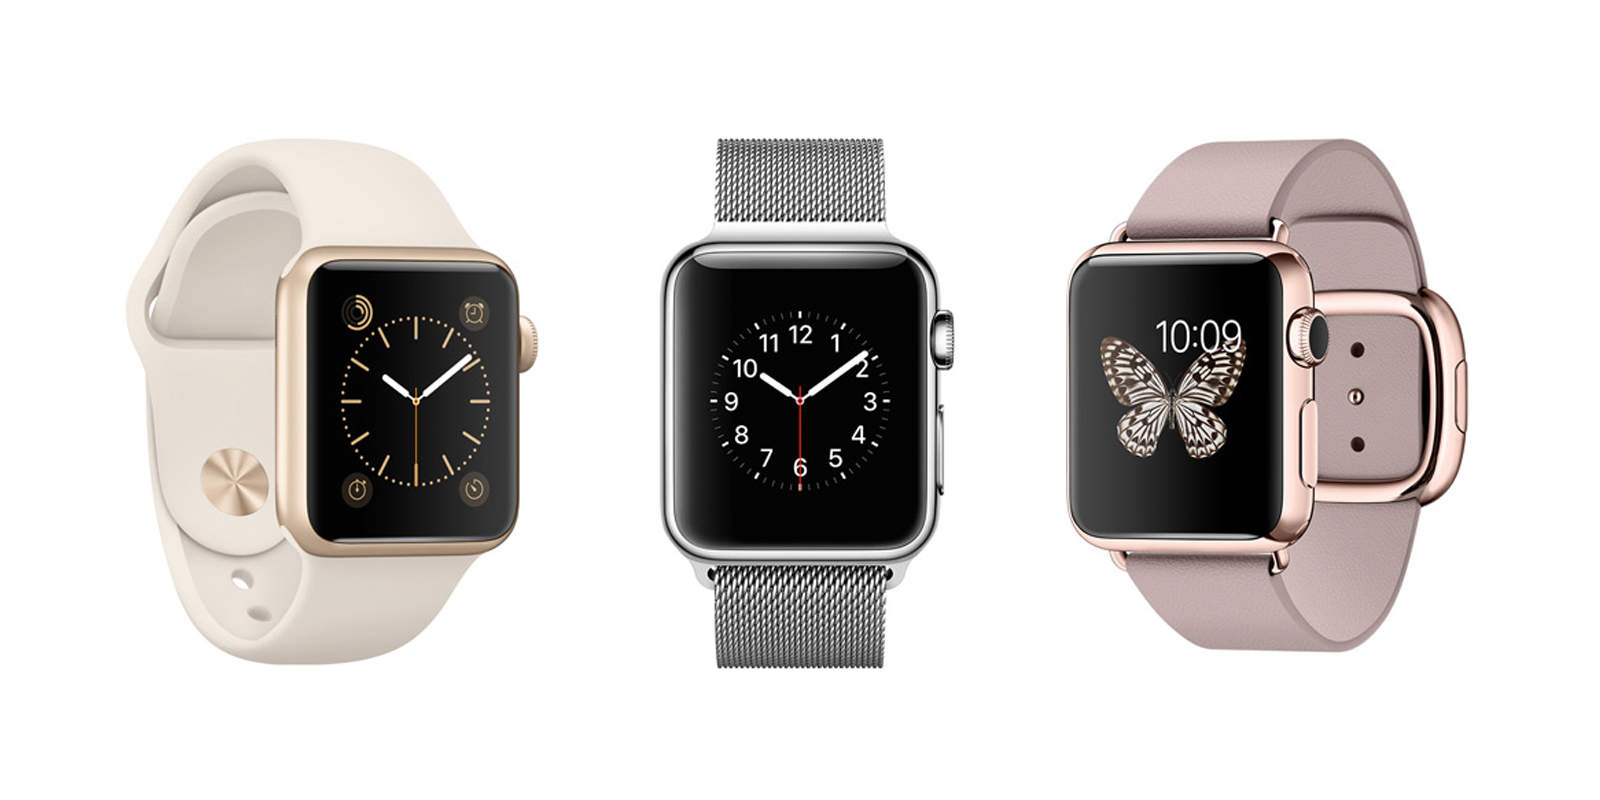 Apple assumes you'll own more than one Apple Watch | Cult of Mac